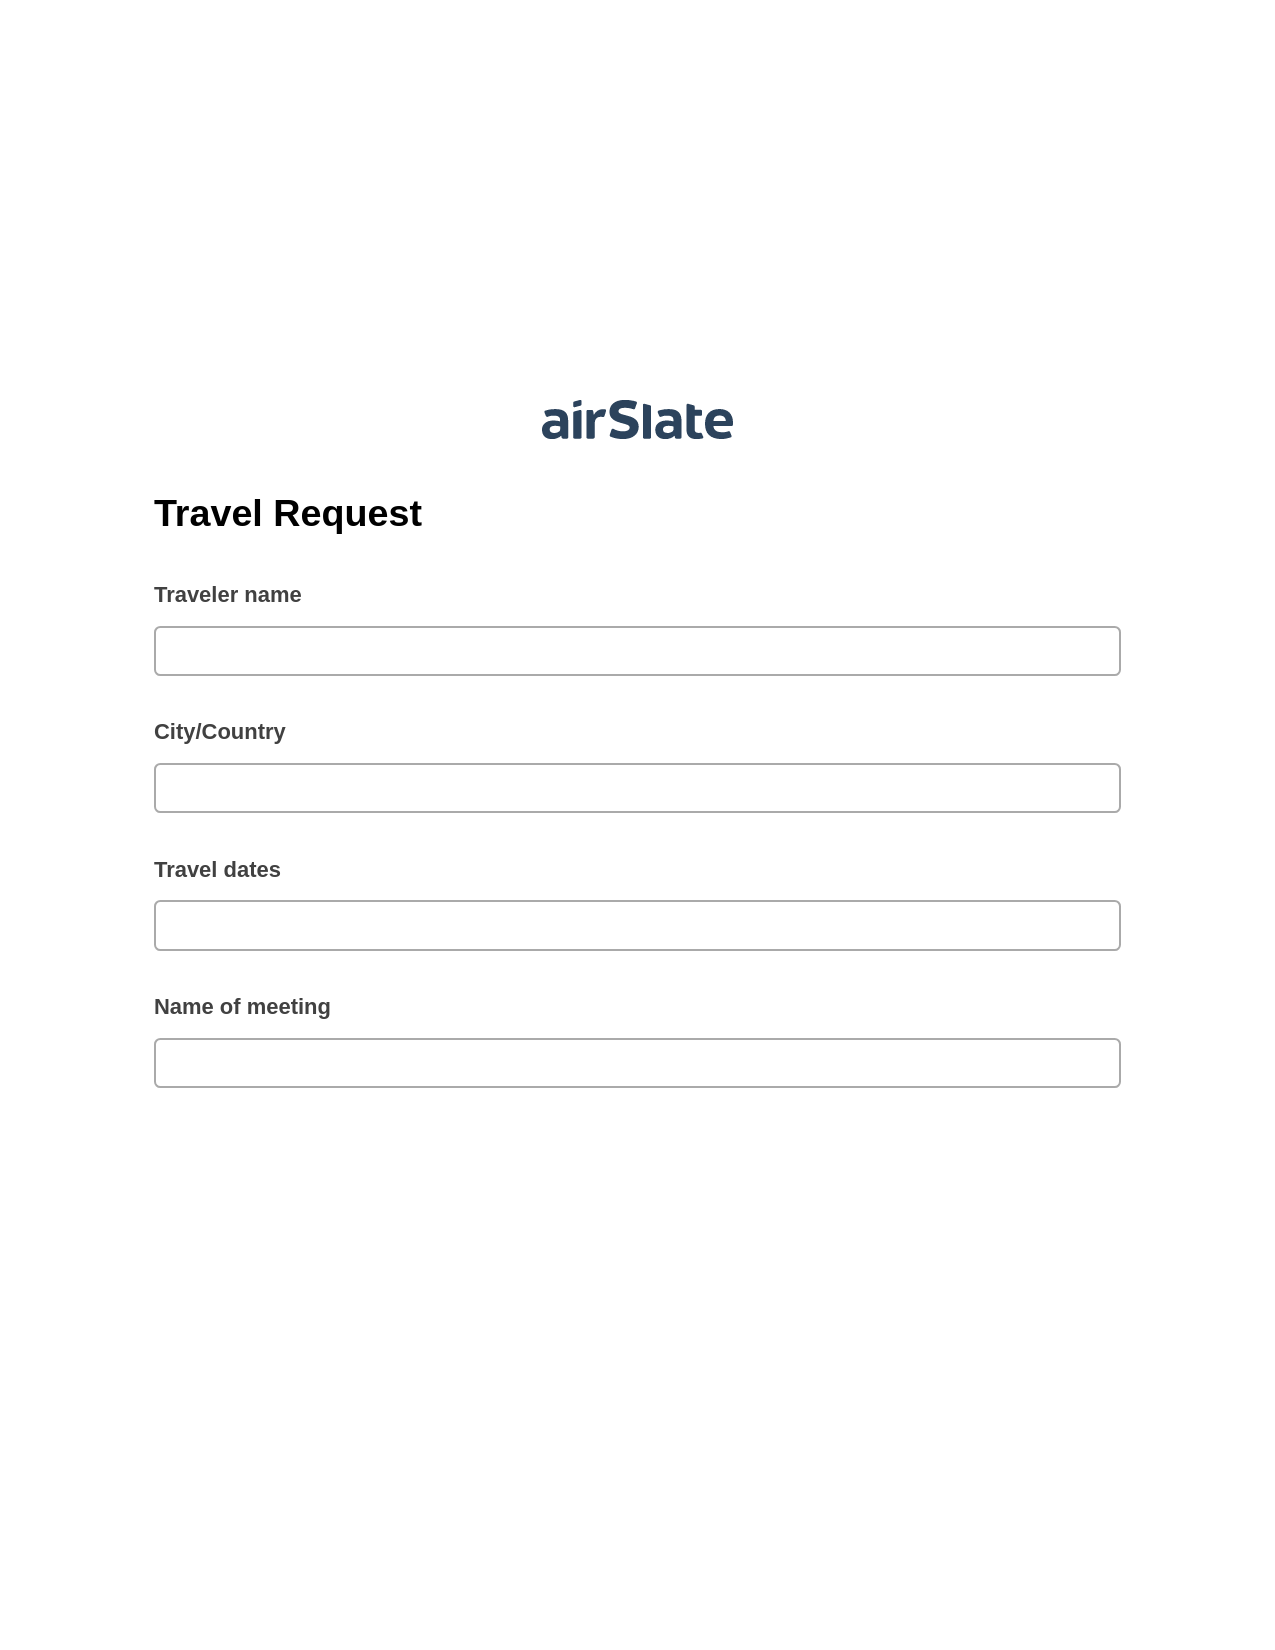 Multirole Travel Request Pre-fill from another Slate Bot, Create slate addon, Export to Smartsheet